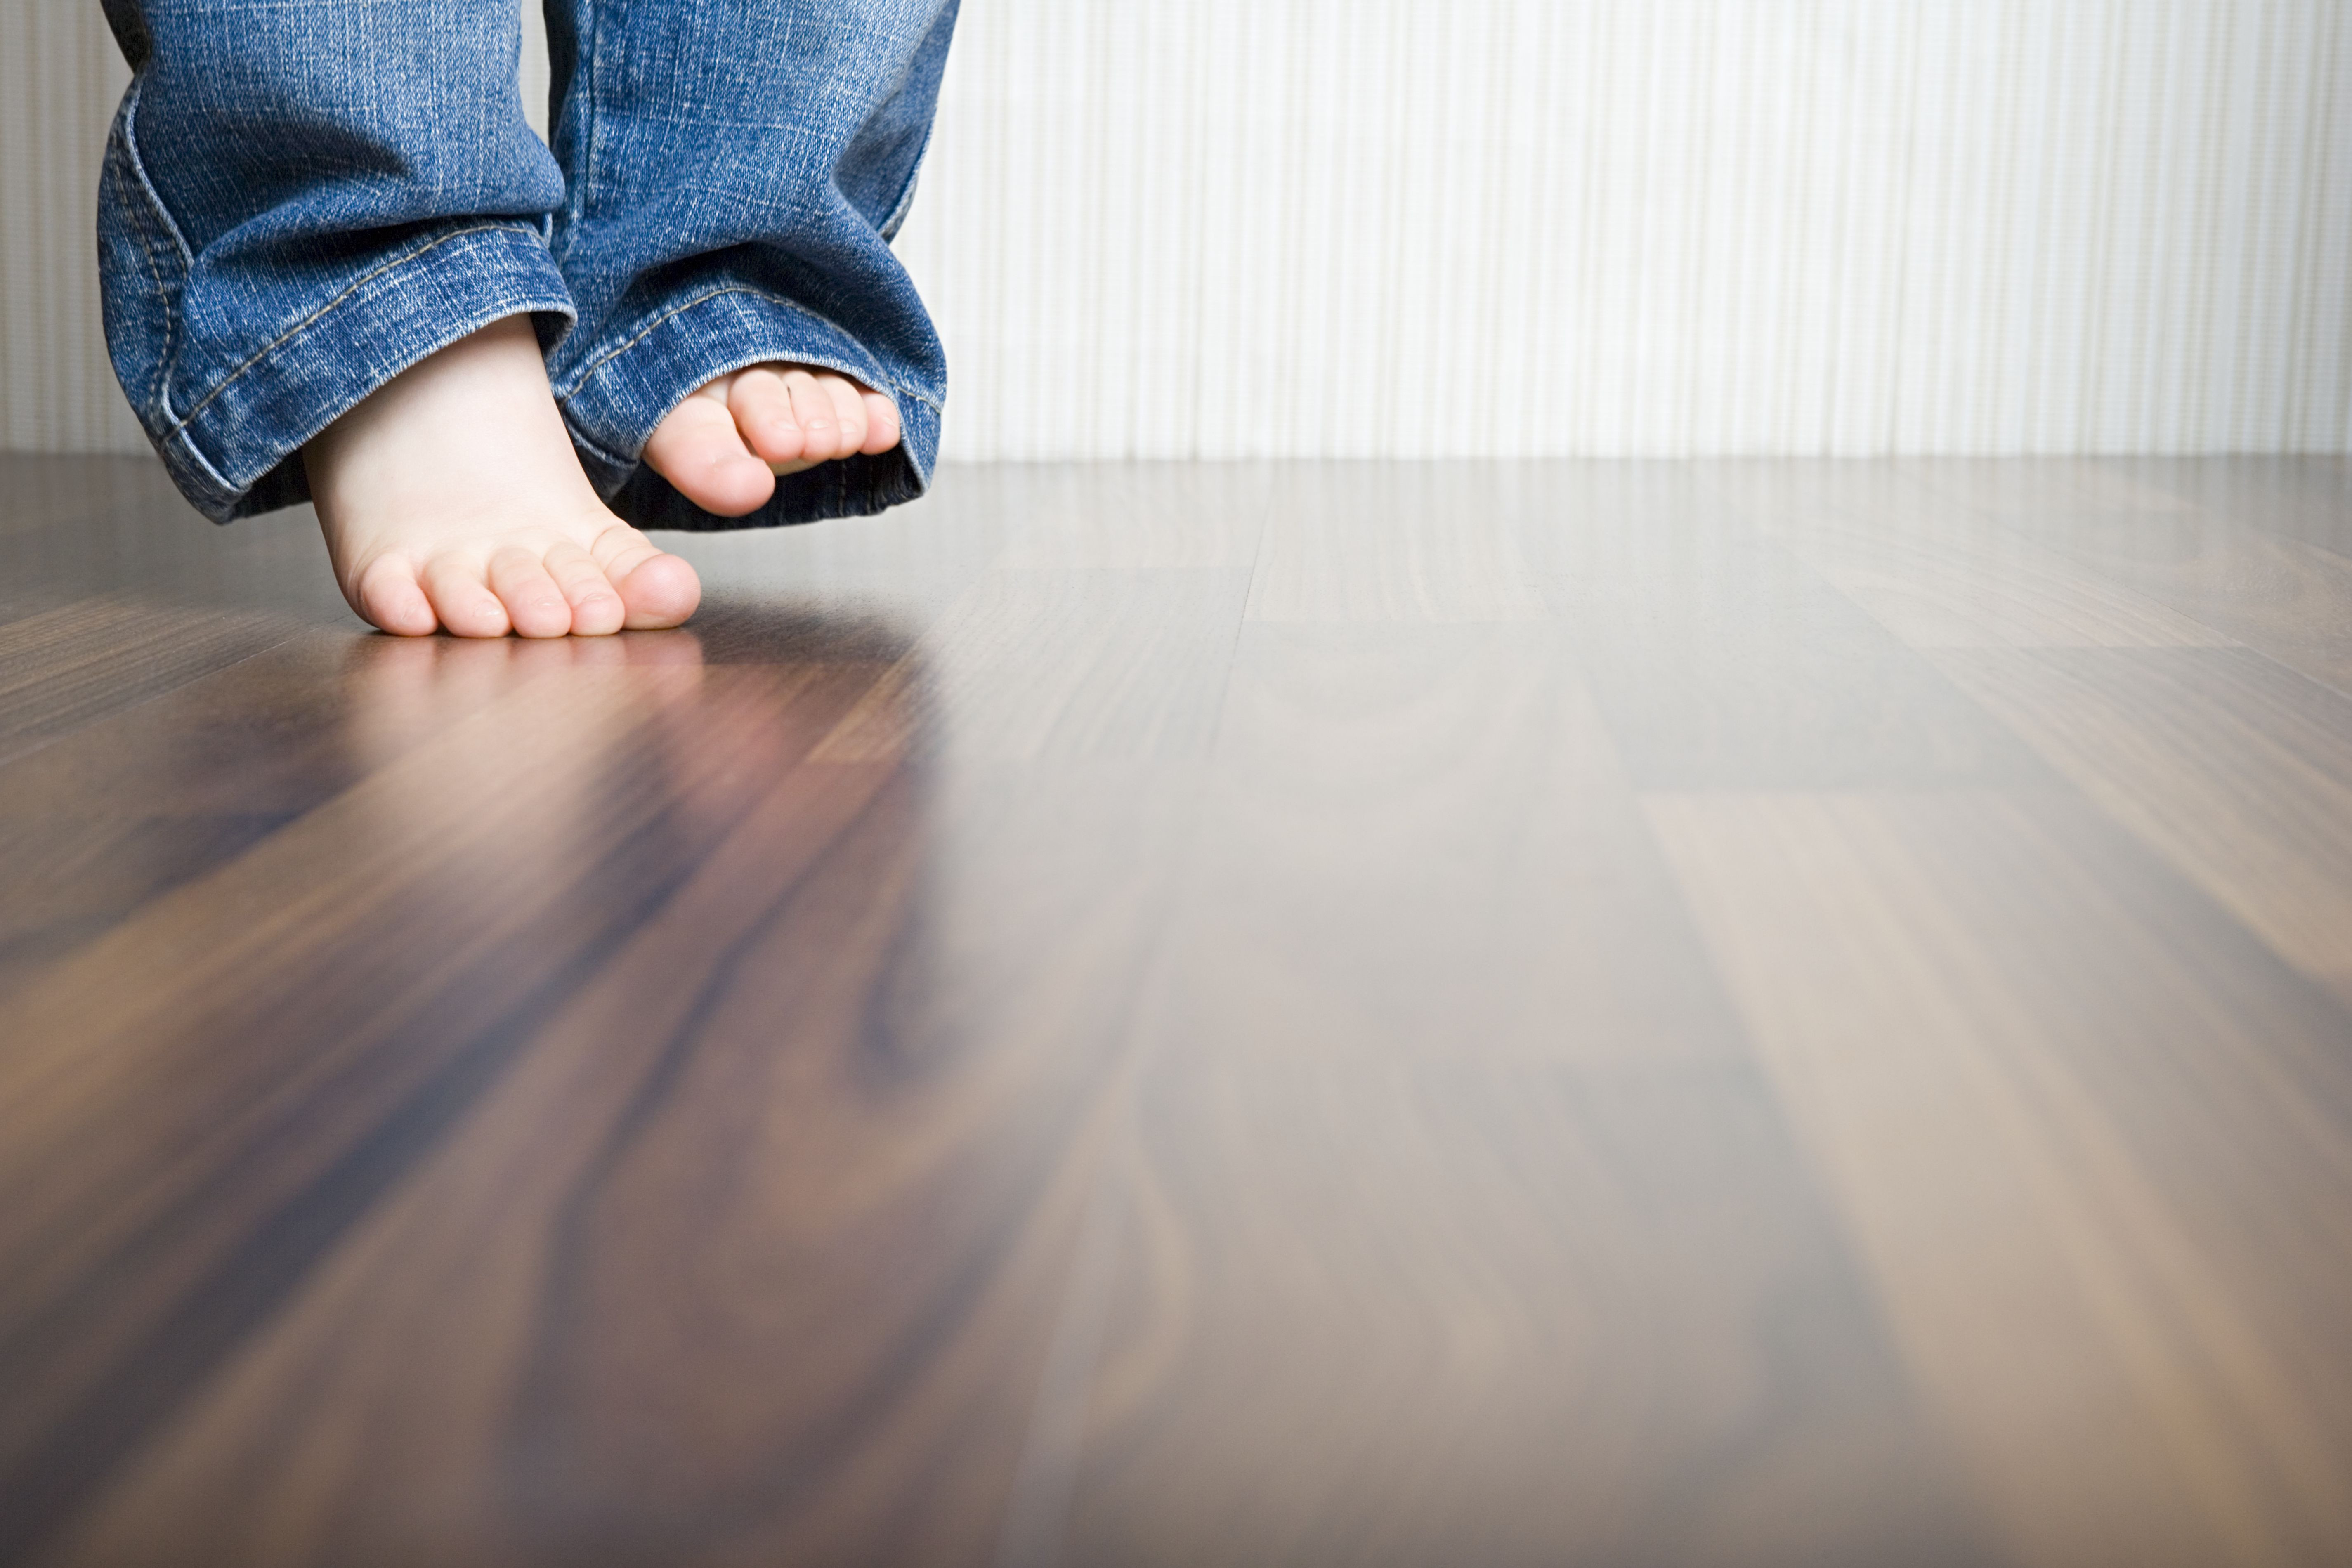 How to Use A Hardwood Floor Edger Of How to Clean Hardwood Floors Best Way to Clean Wood Flooring with Regard to 1512149908 Gettyimages 75403973